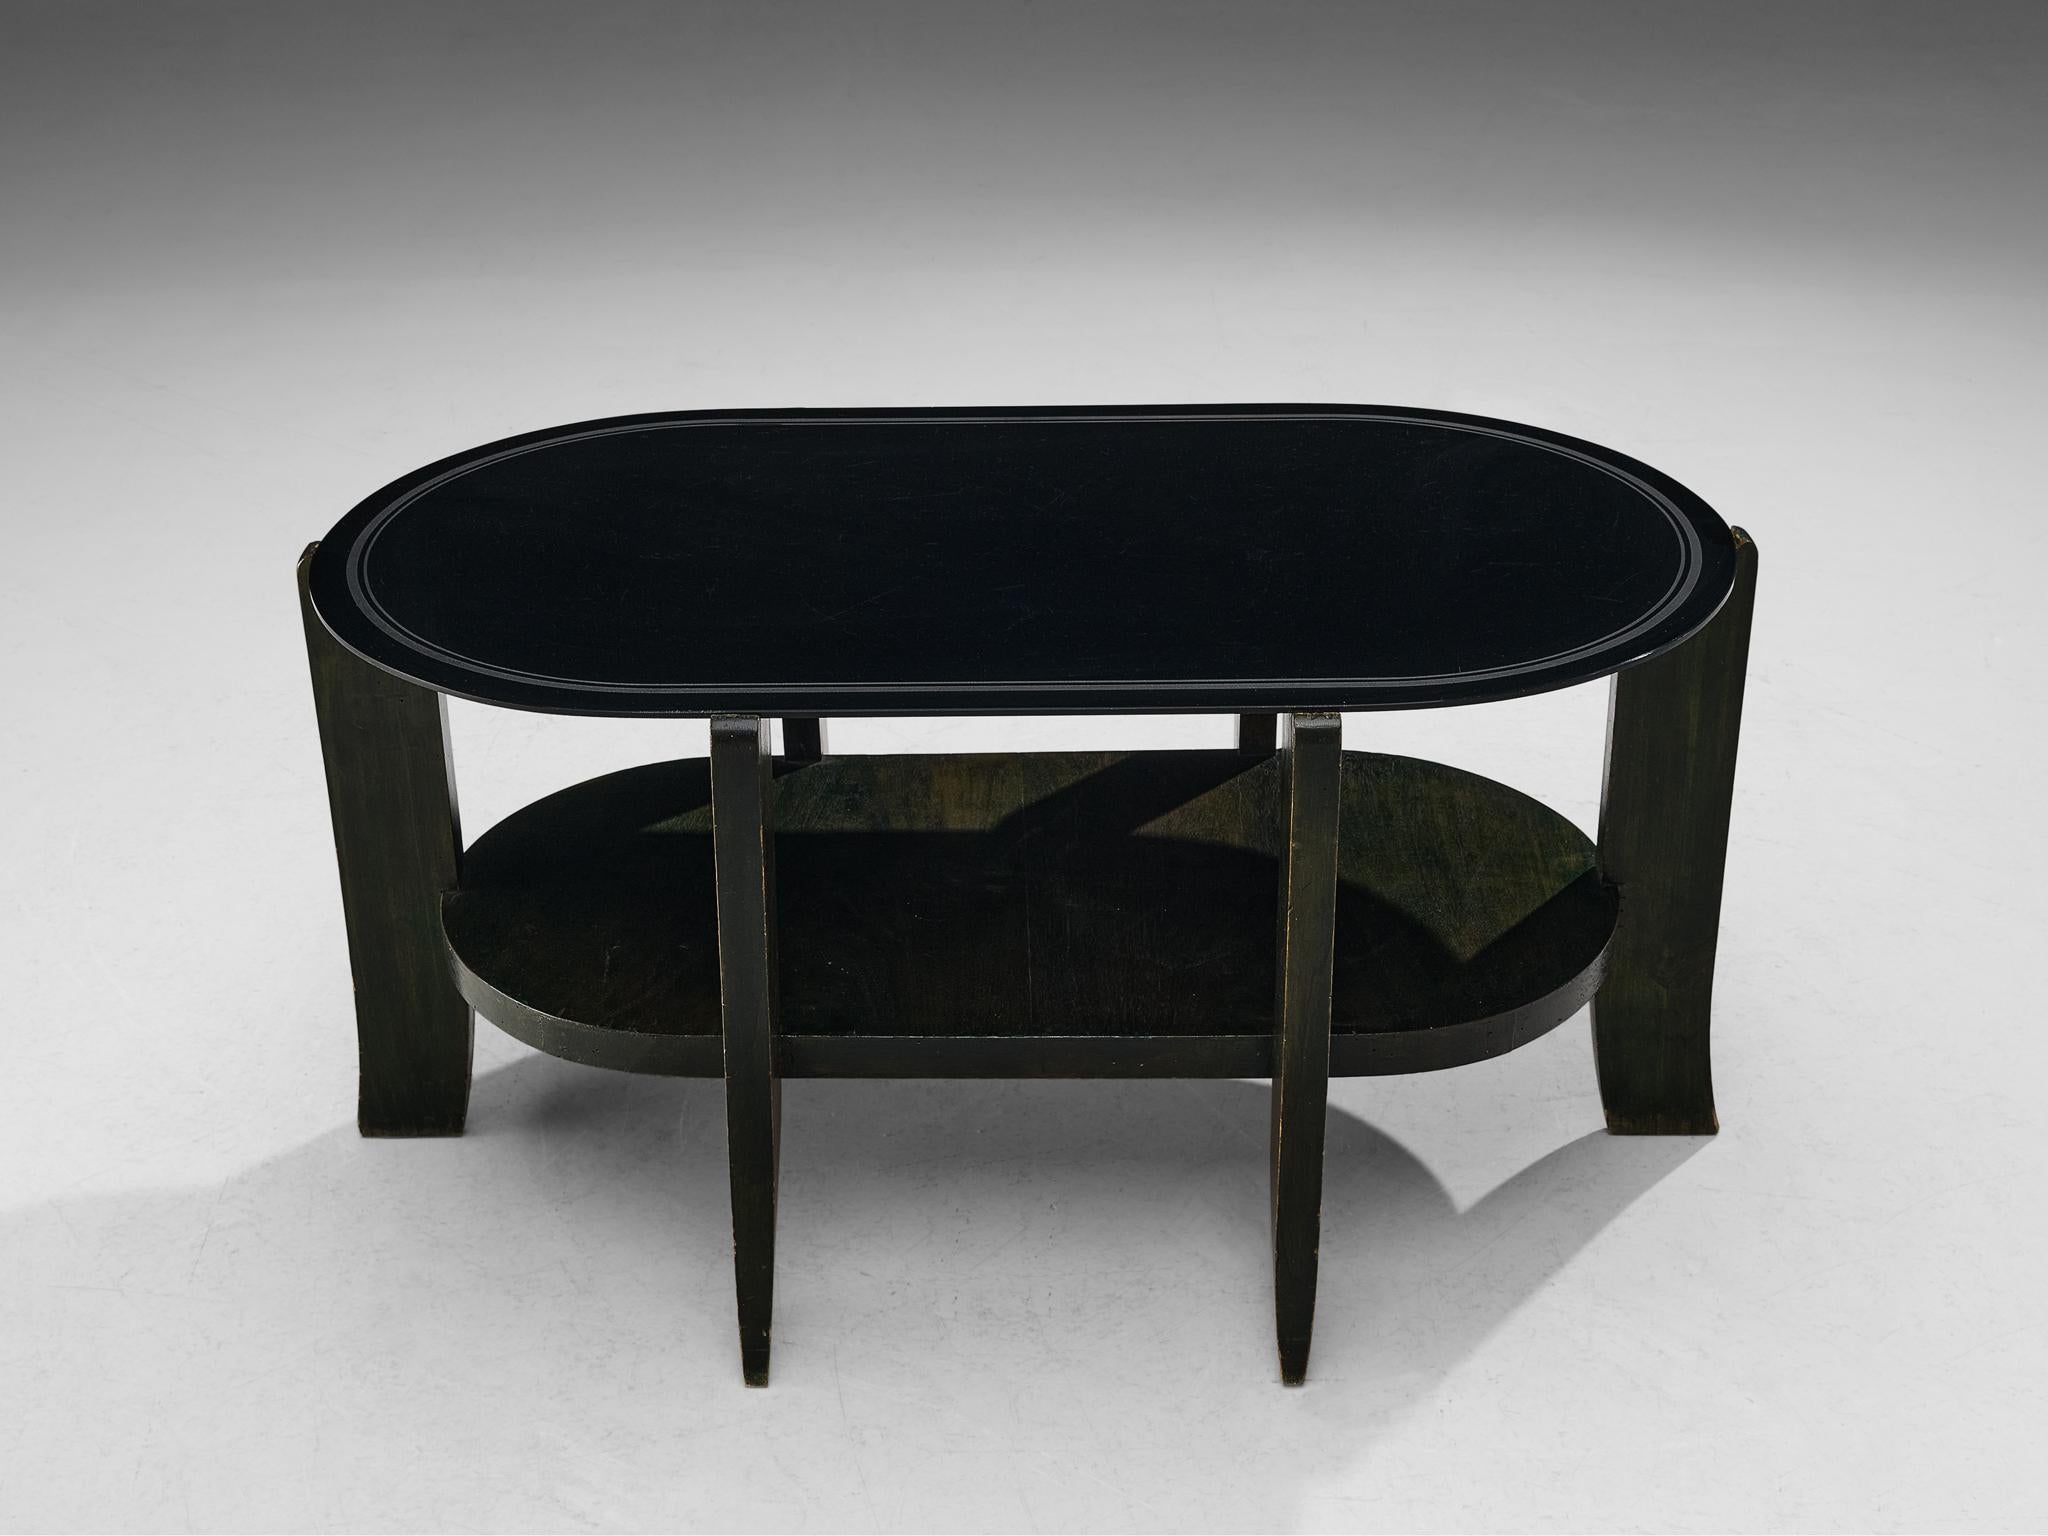 Mid-20th Century Italian Art Deco Oval Shaped Coffee Table in Green Stained Wood and Black Glass